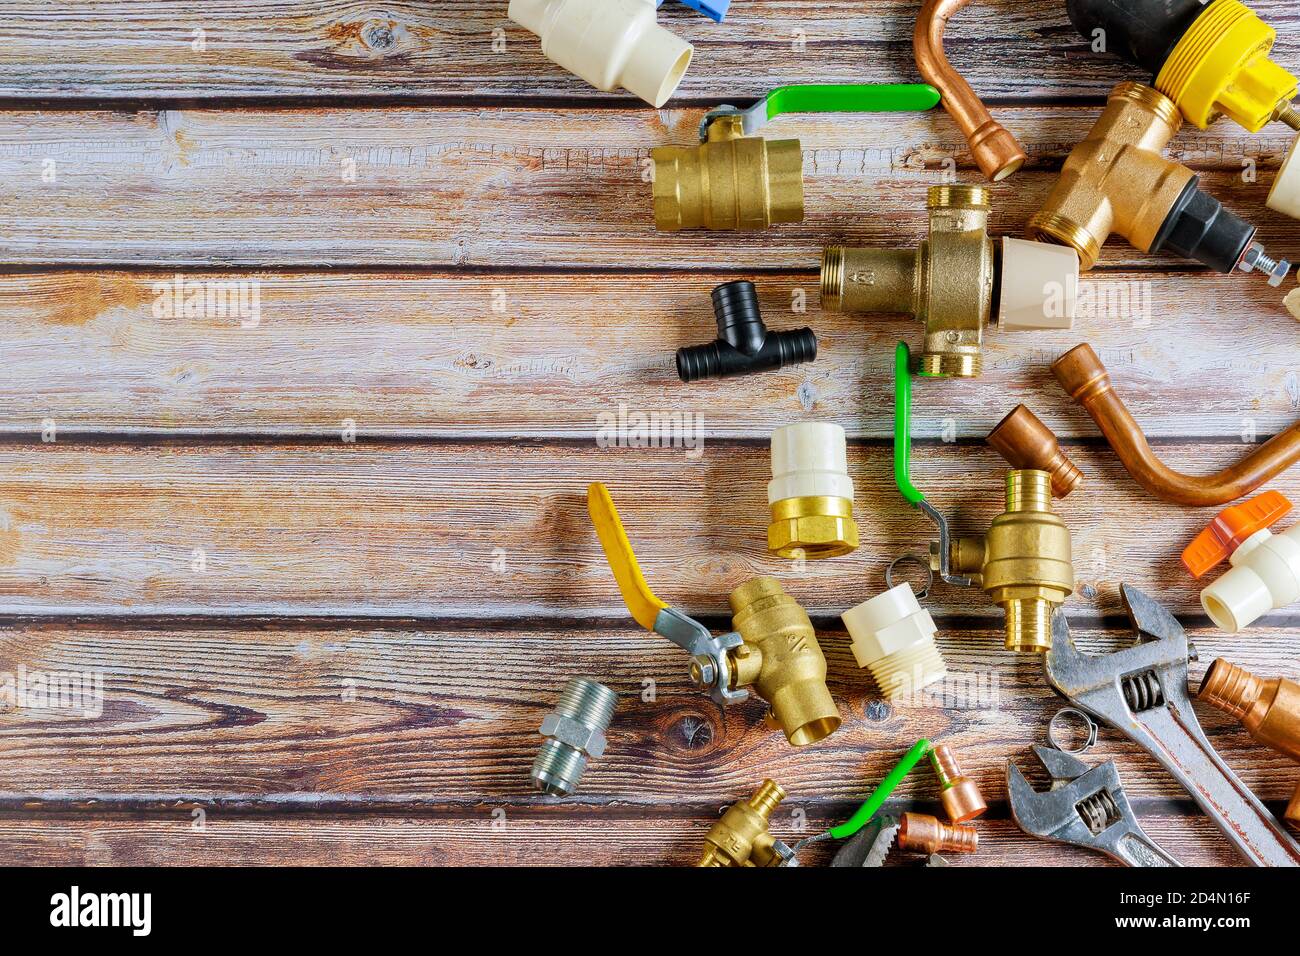 Brass diverter used on shower and bathtub with copper fitting and pipes set of tools for the plumbing in the work pipe cutting tools, fixings Stock Photo